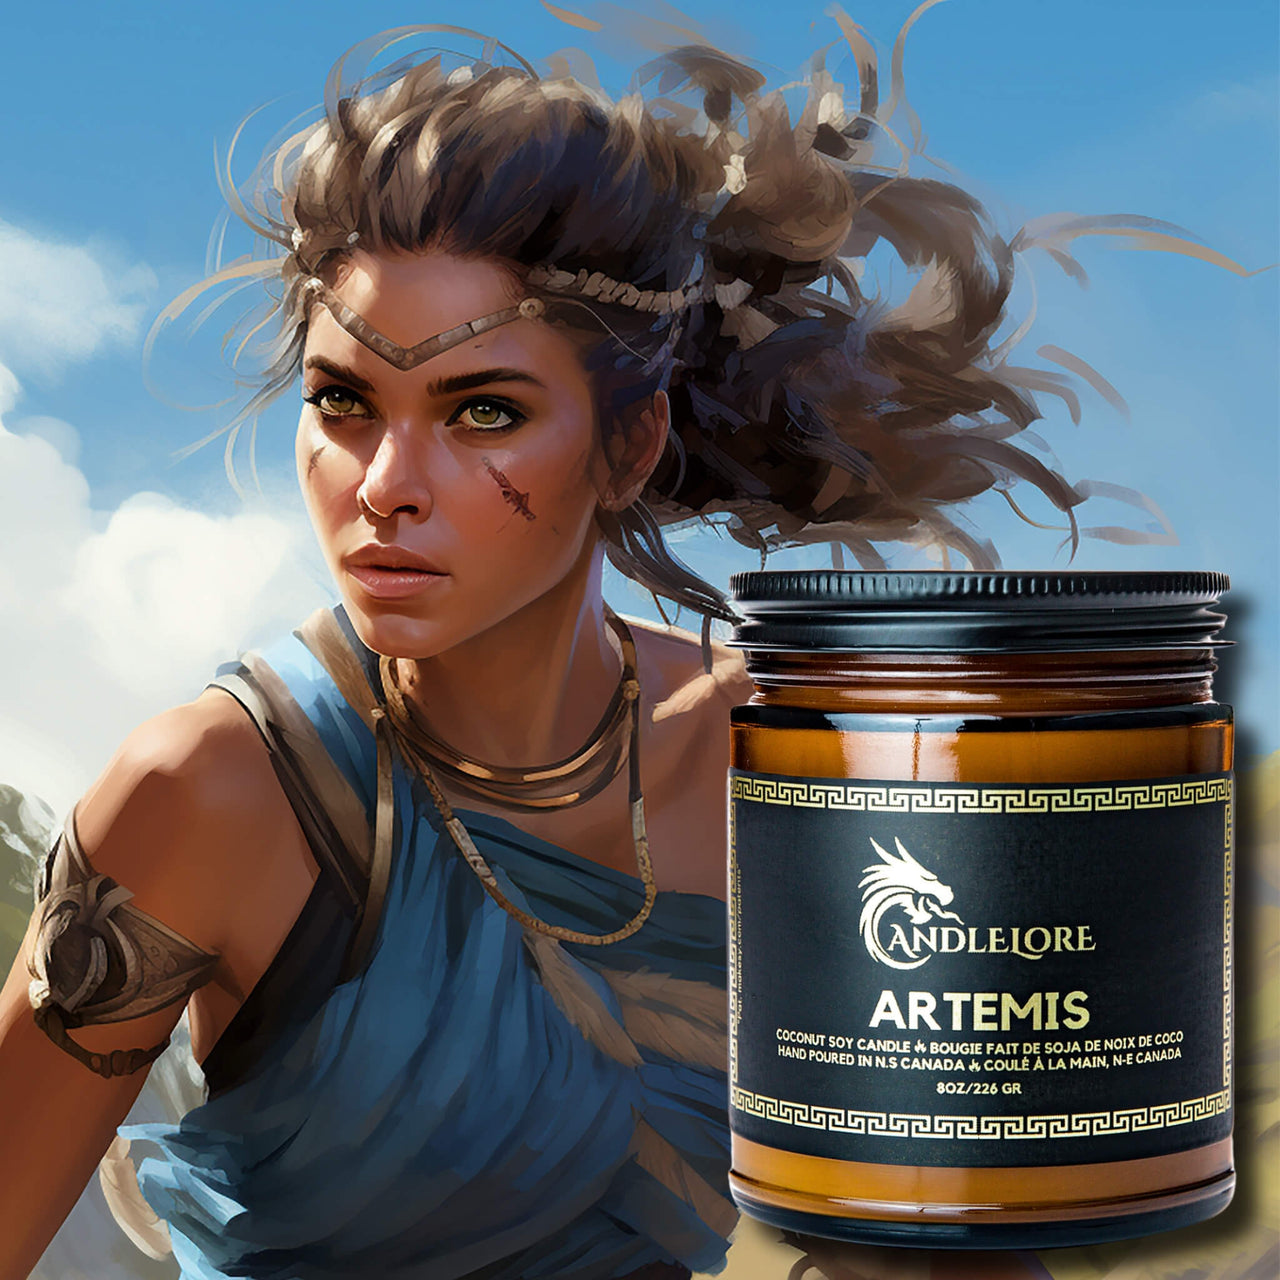 Artemis with her candle beside her